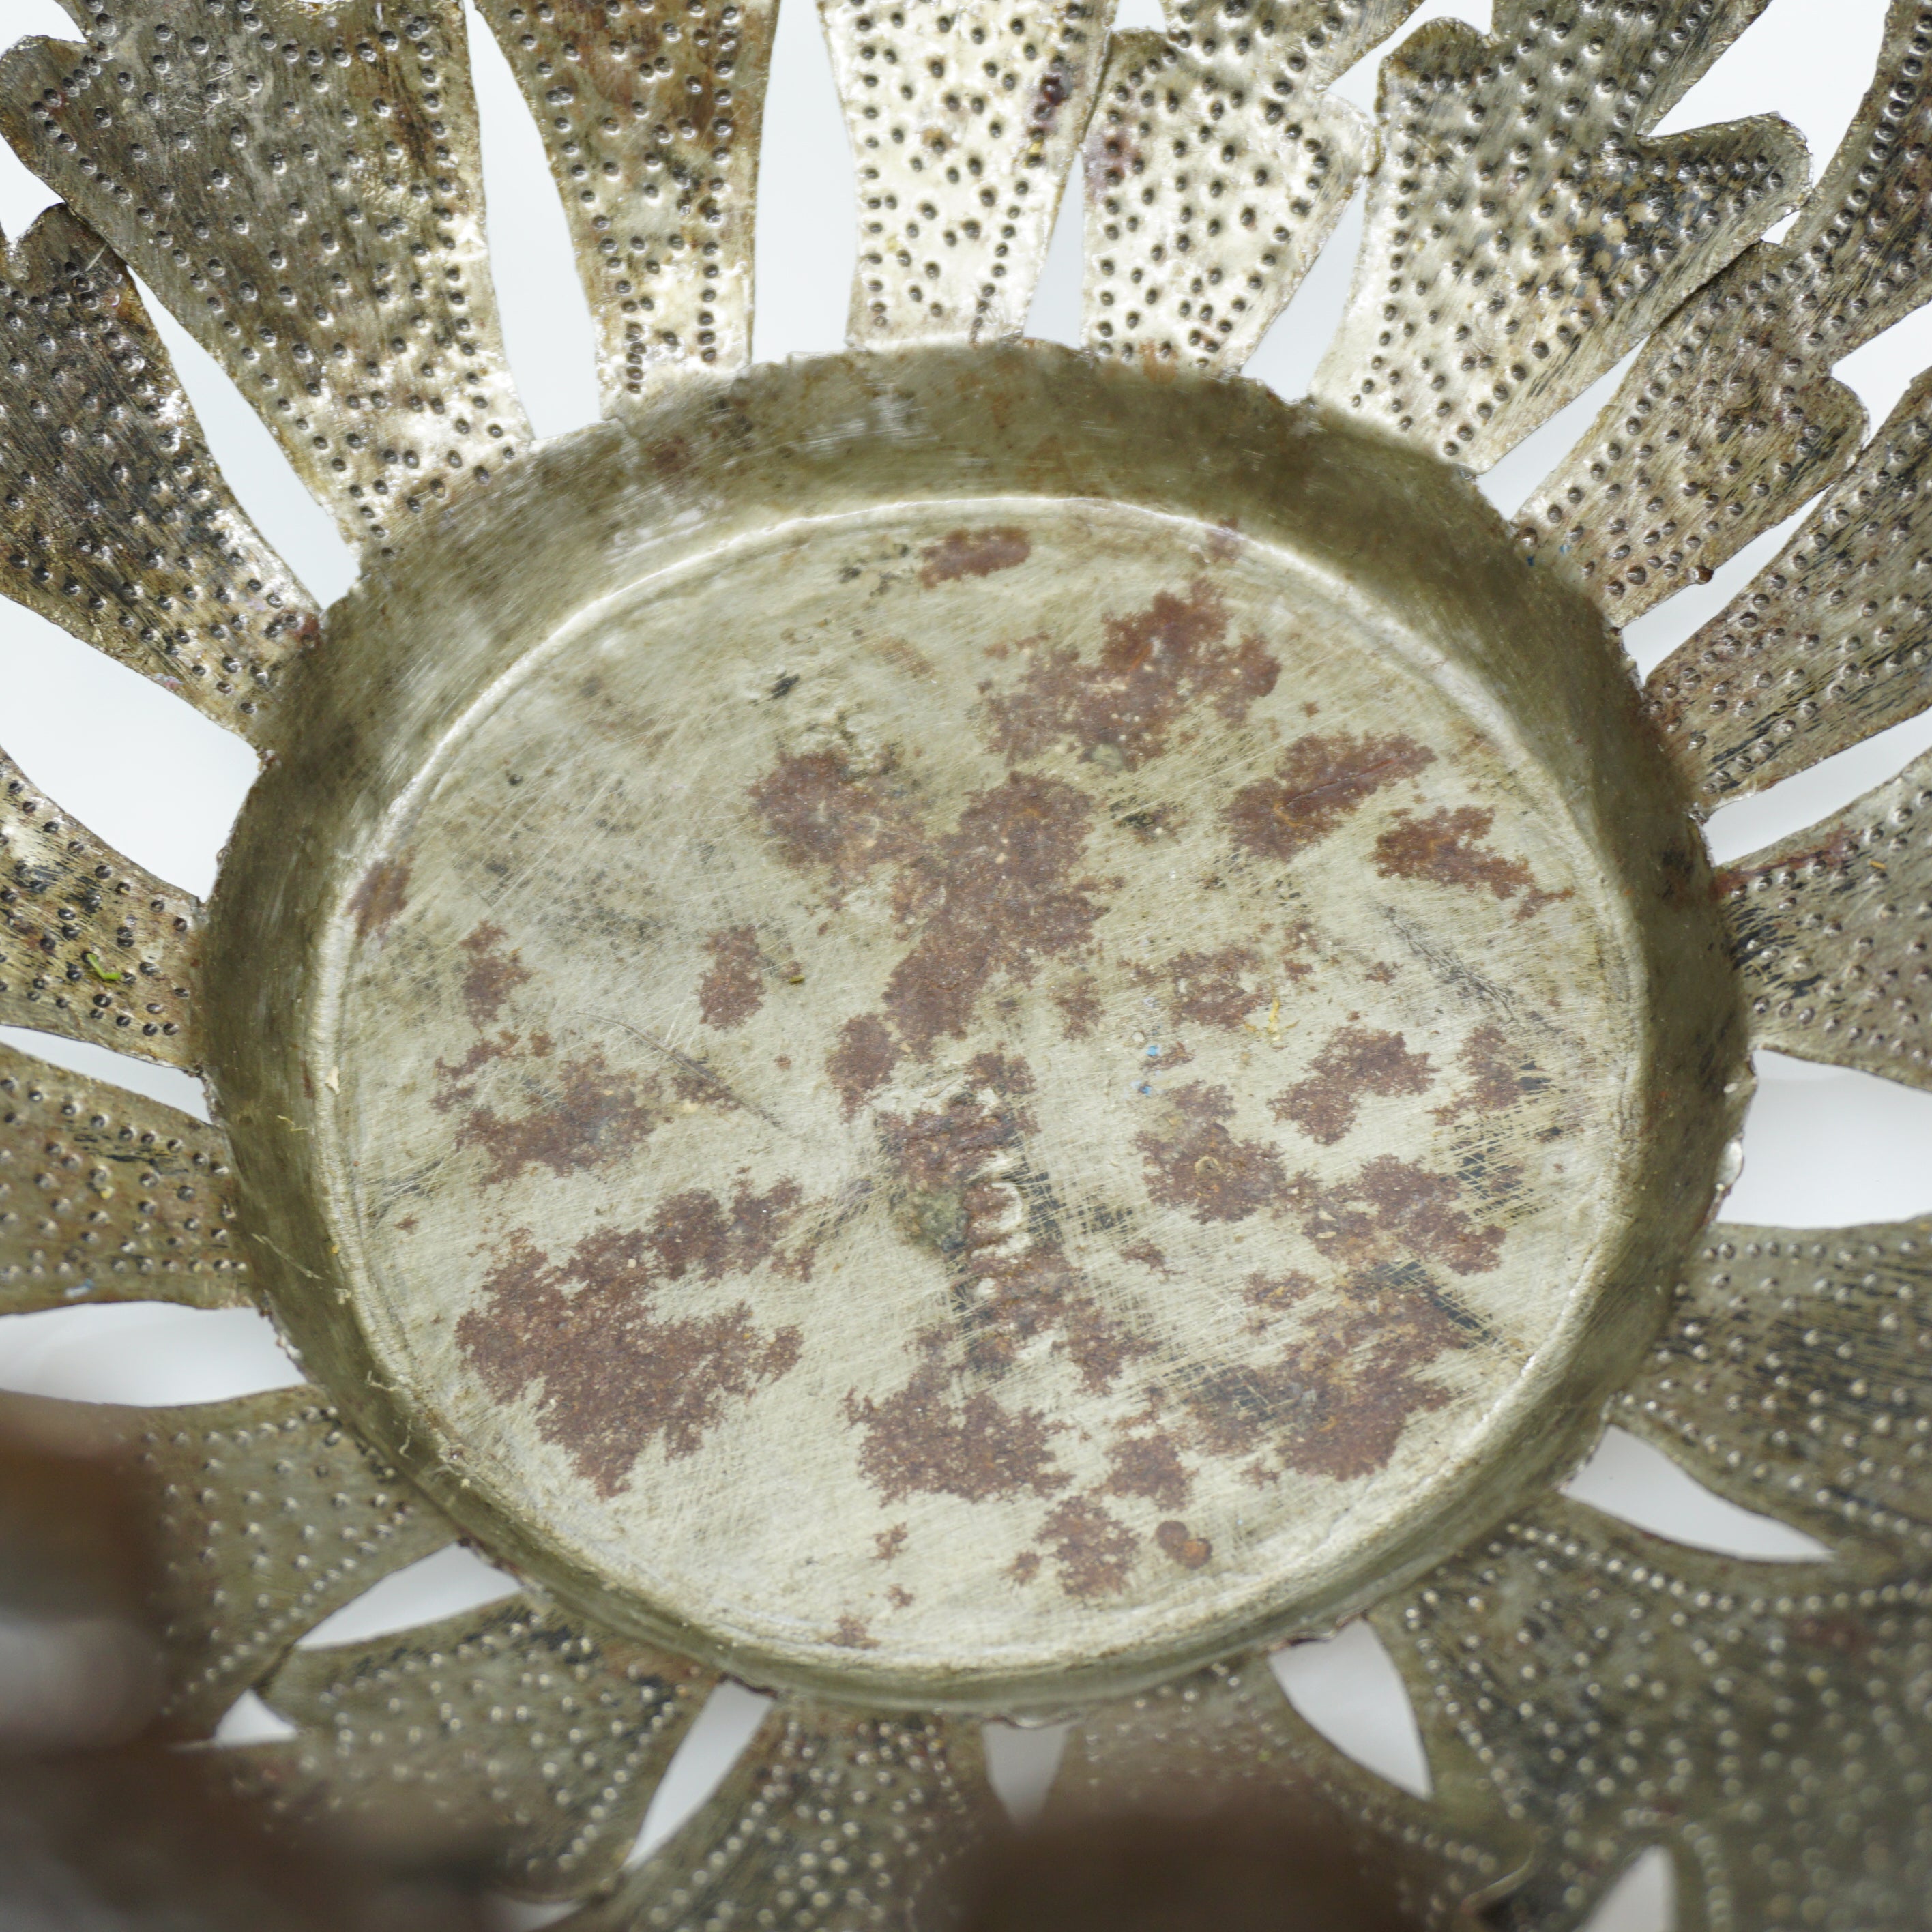 Signed Josnel Bruno Handmade, Hammered, Chiseled and Incised Coral Reef Bowl. Made in Haiti.